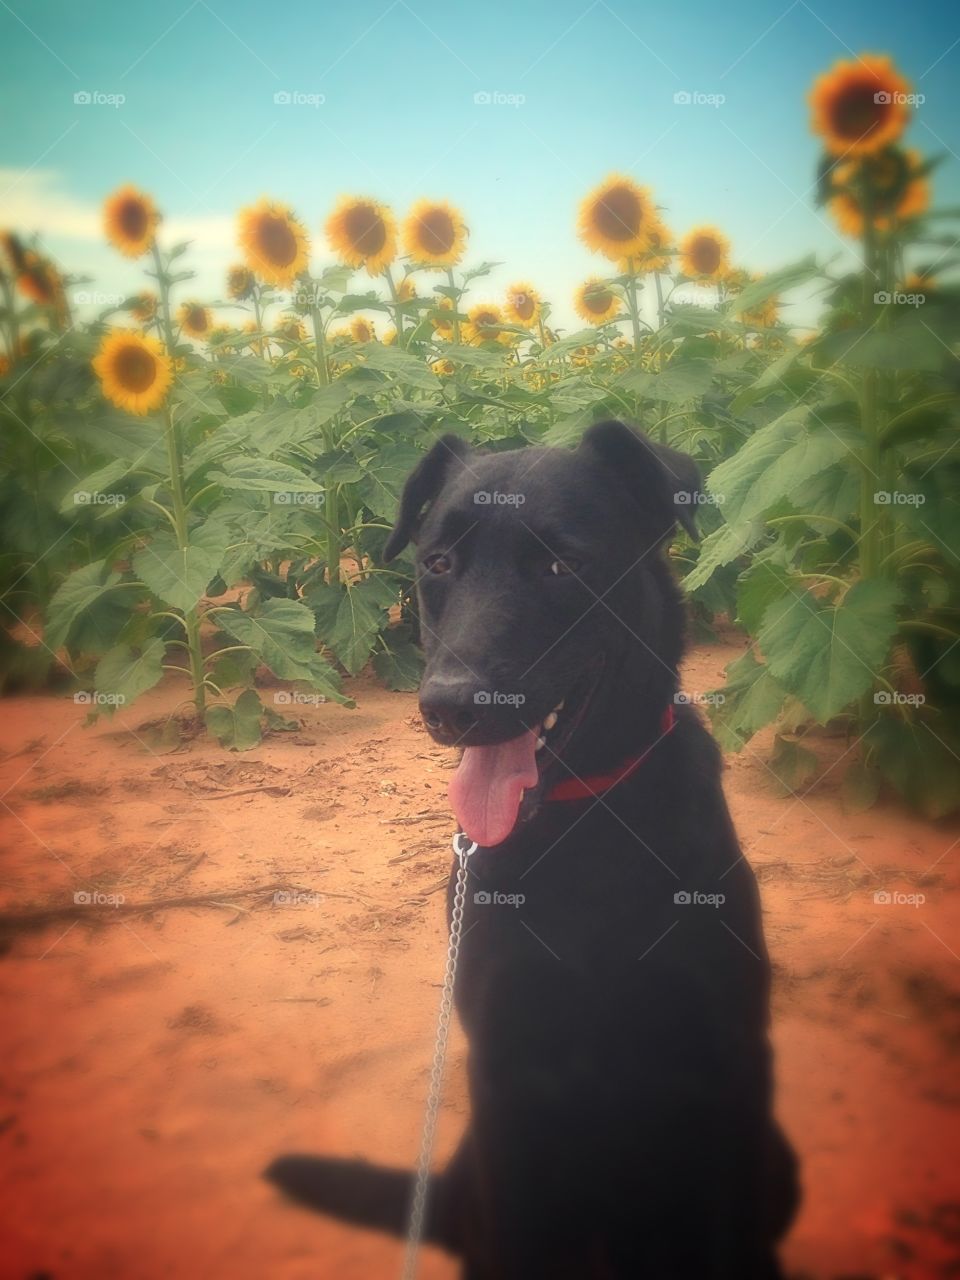 In the field of yellow . My puppy Killian loves to play in the sunflower field. 